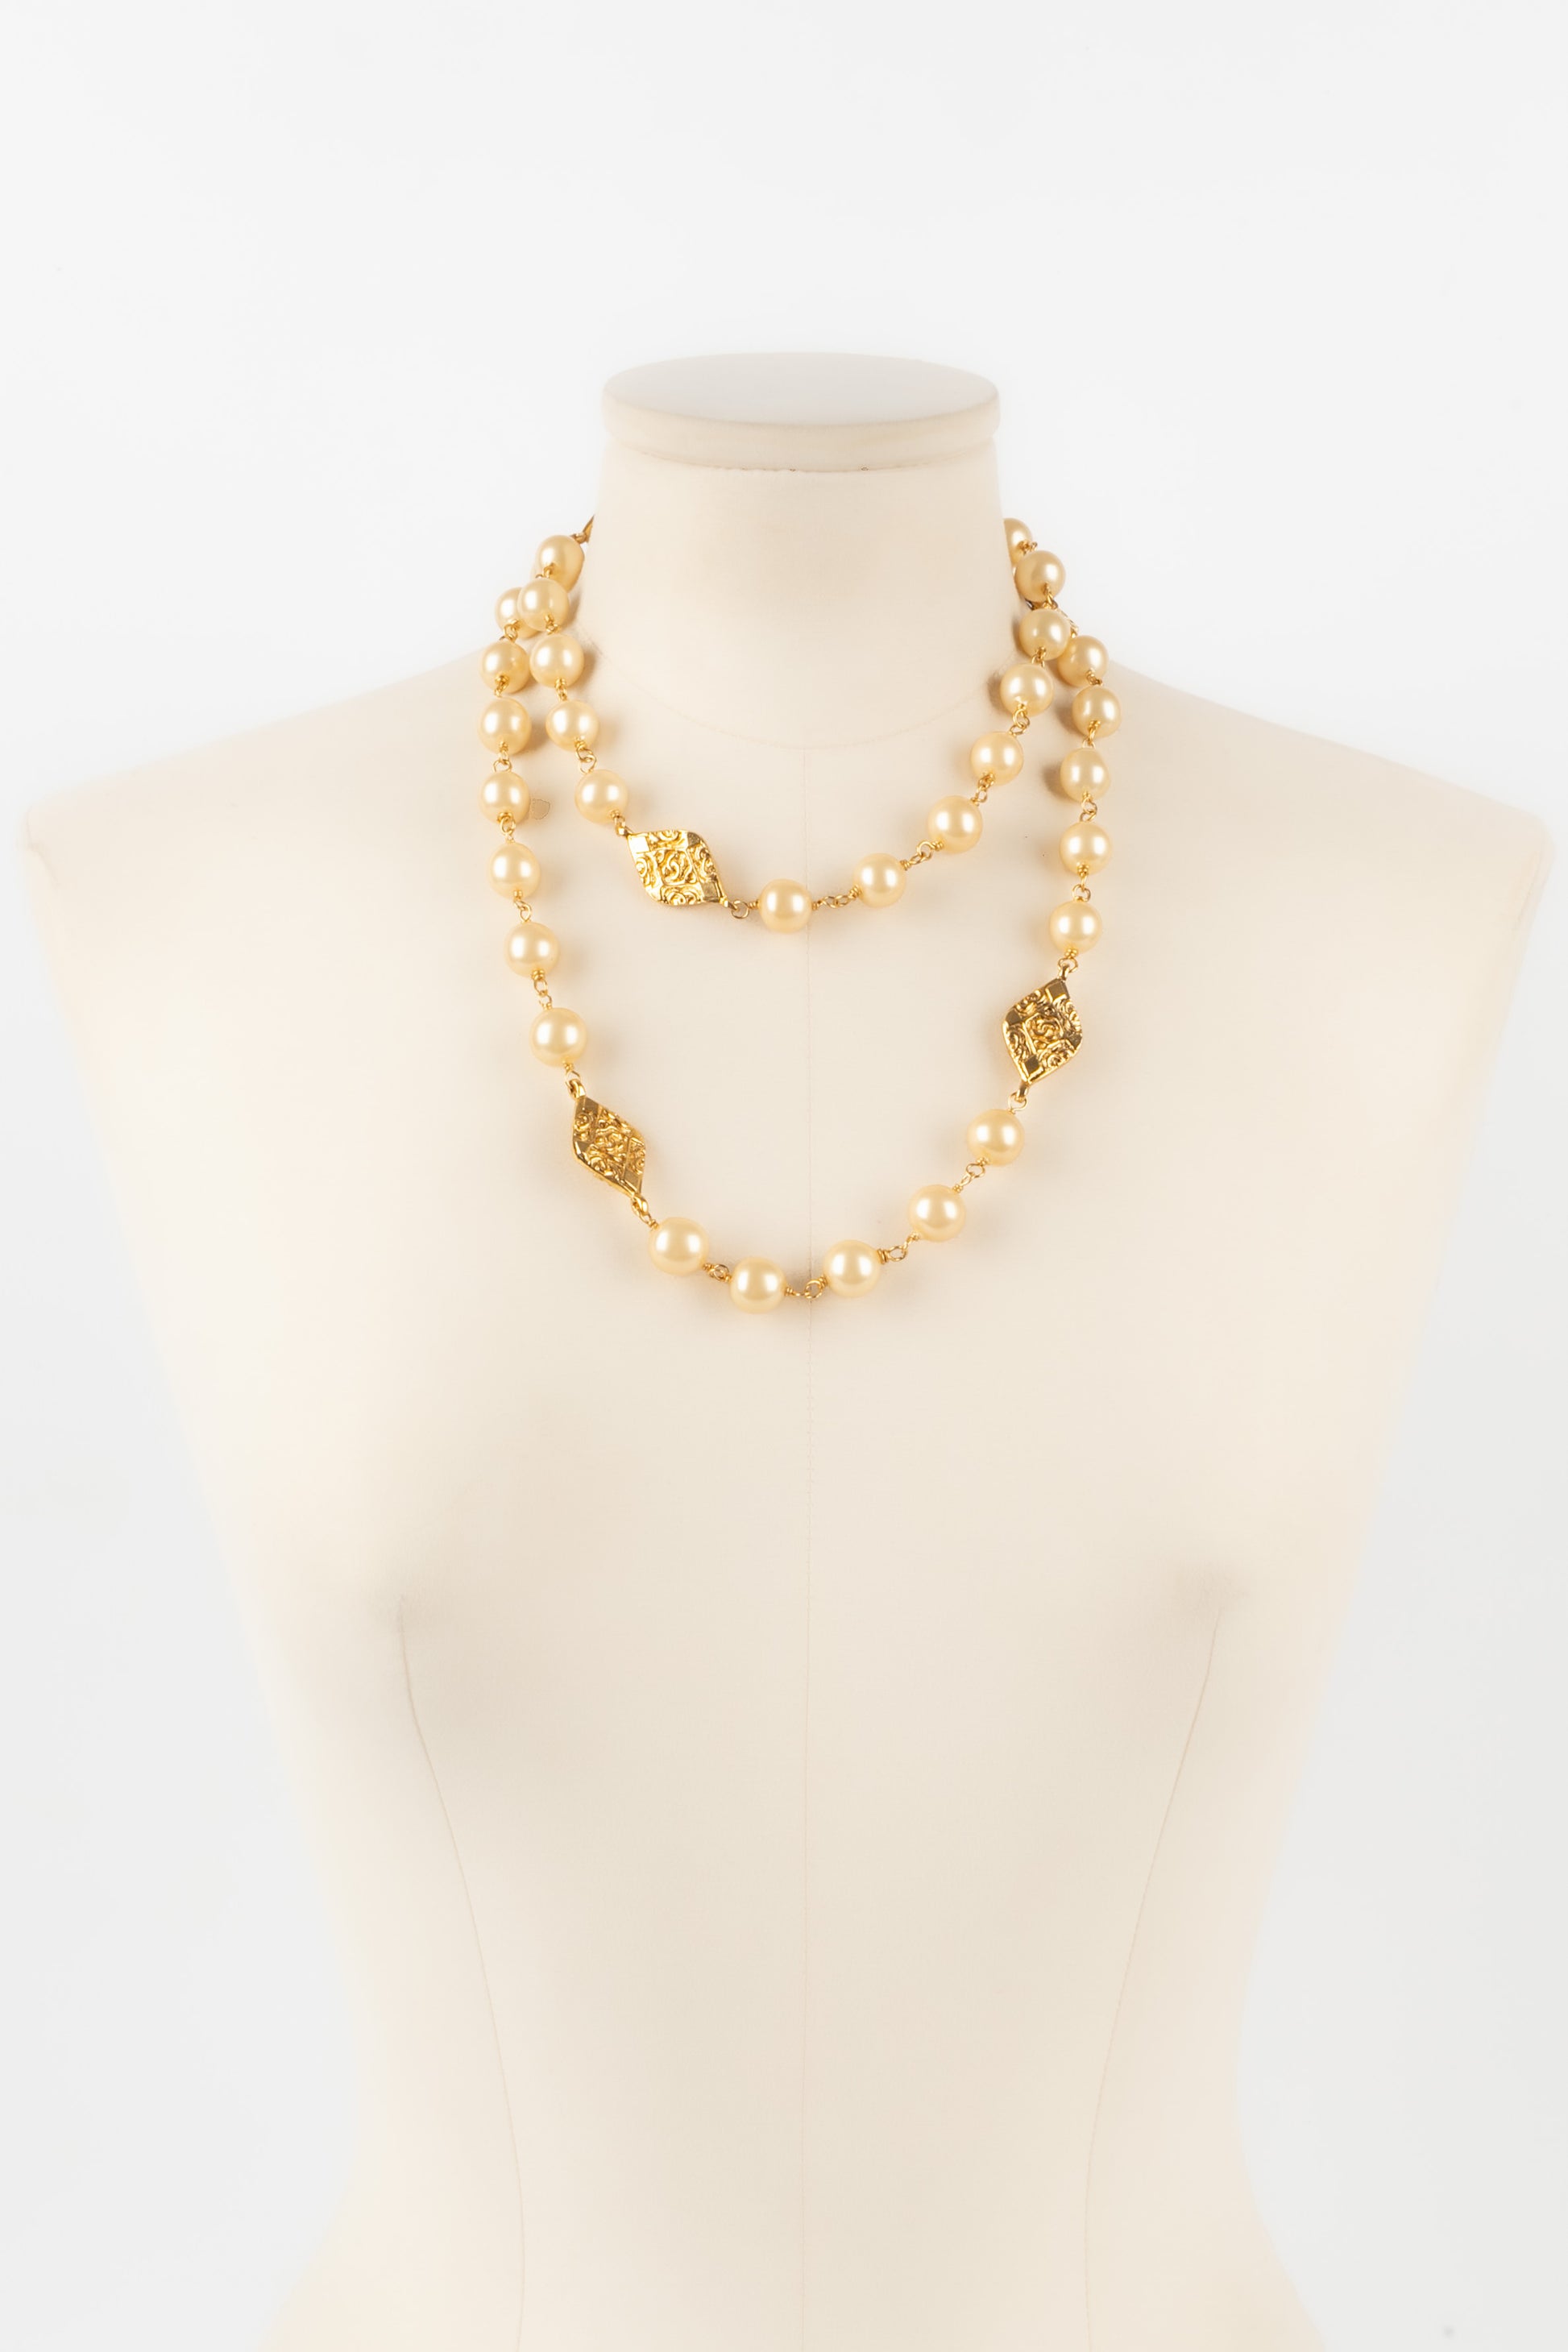 Collier Chanel 